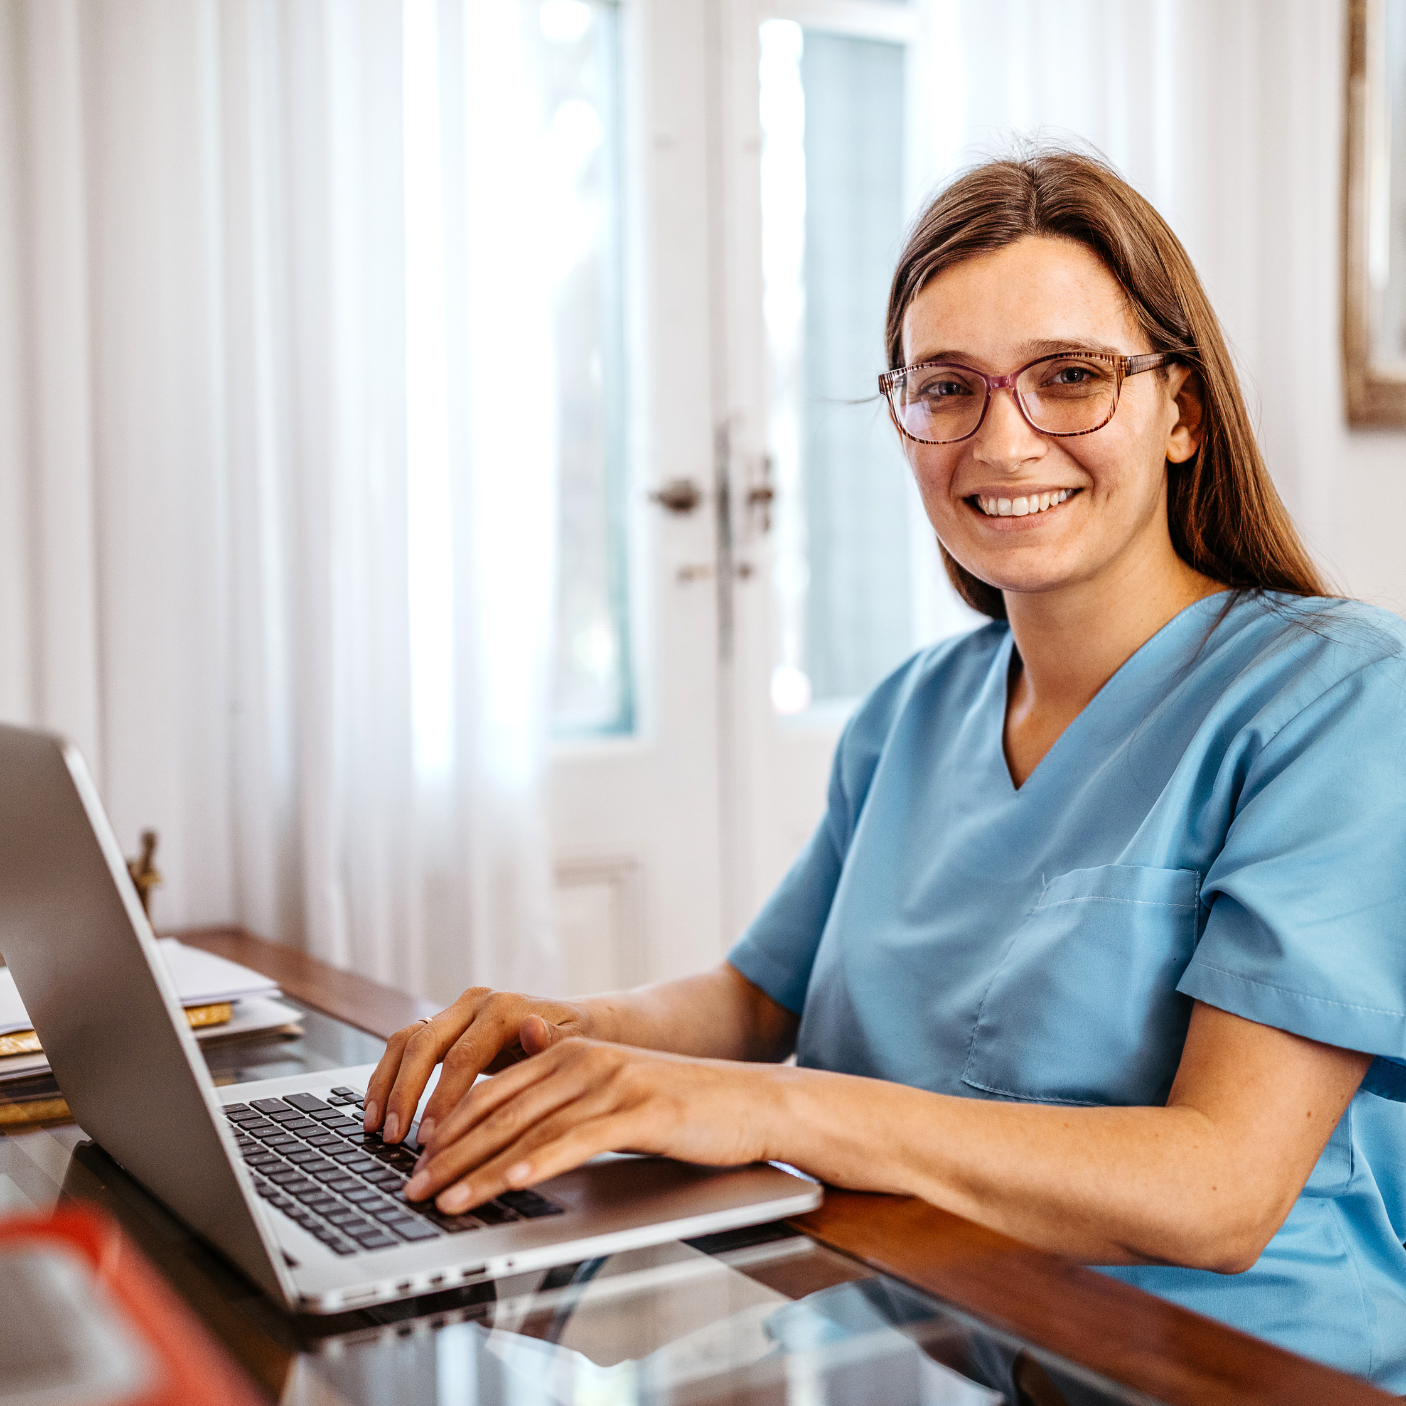 A white woman wearing blue scrubs sits at a desk. She wears glasses and smiles while using a laptop.